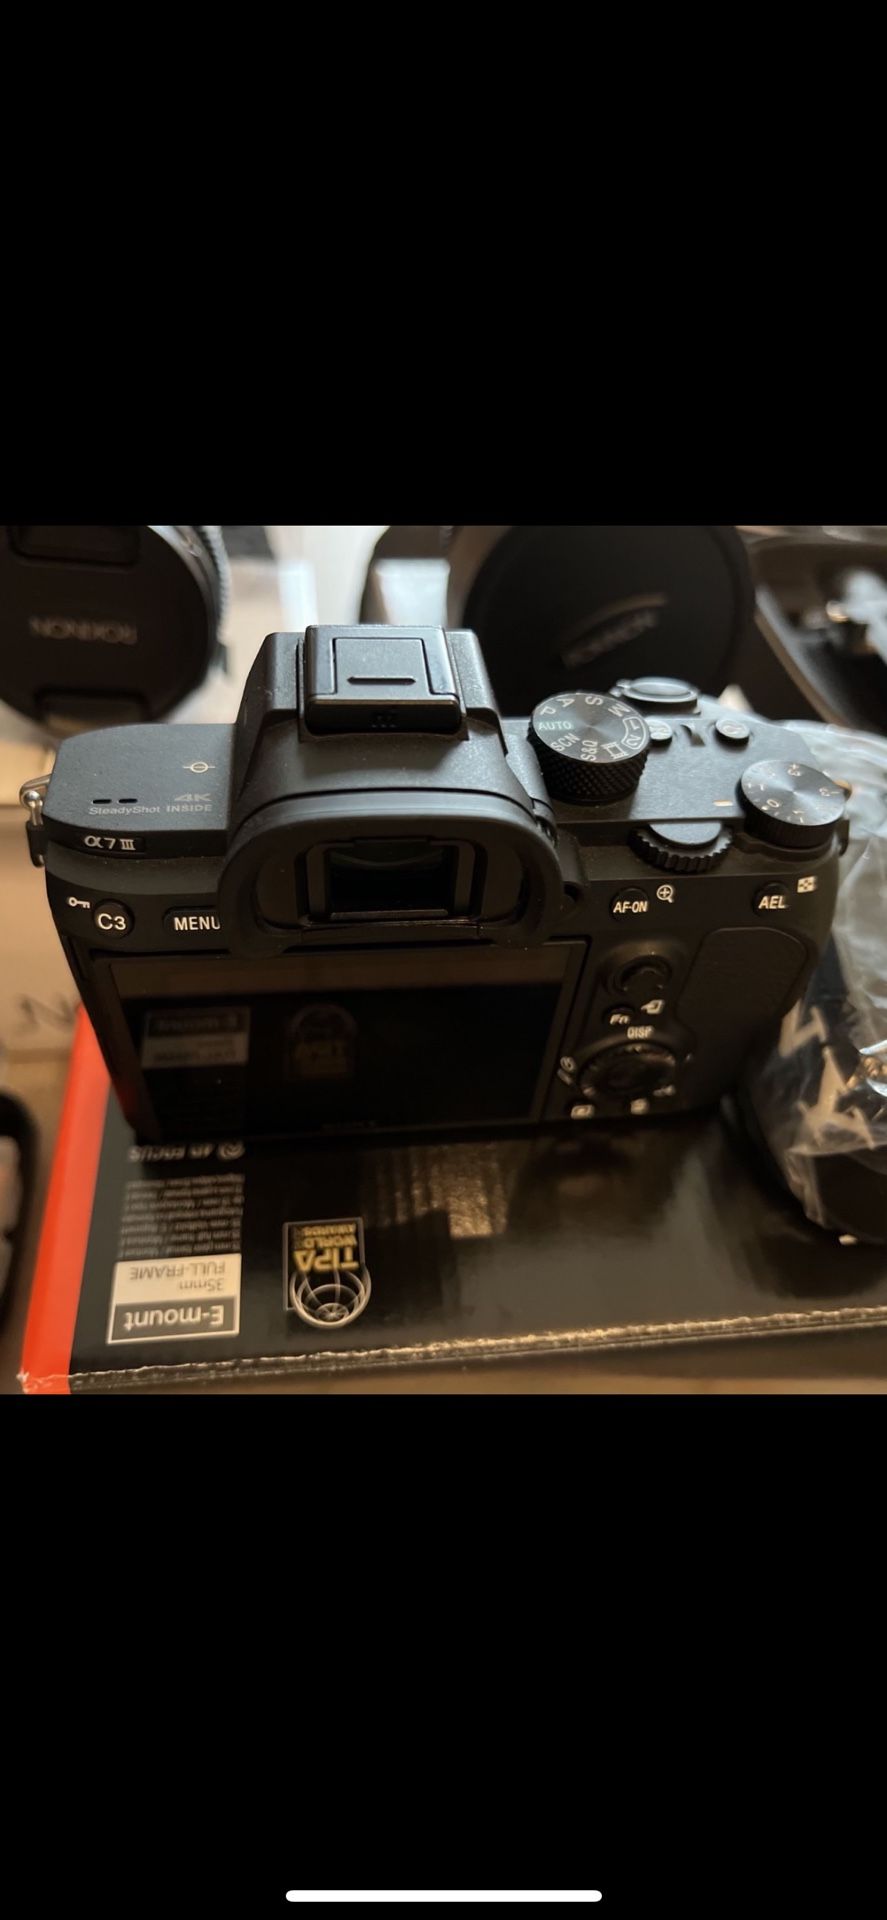 Sony - Alpha a7 III Mirrorless [Video] Camera ( Shipping Only For Safety Reasons)